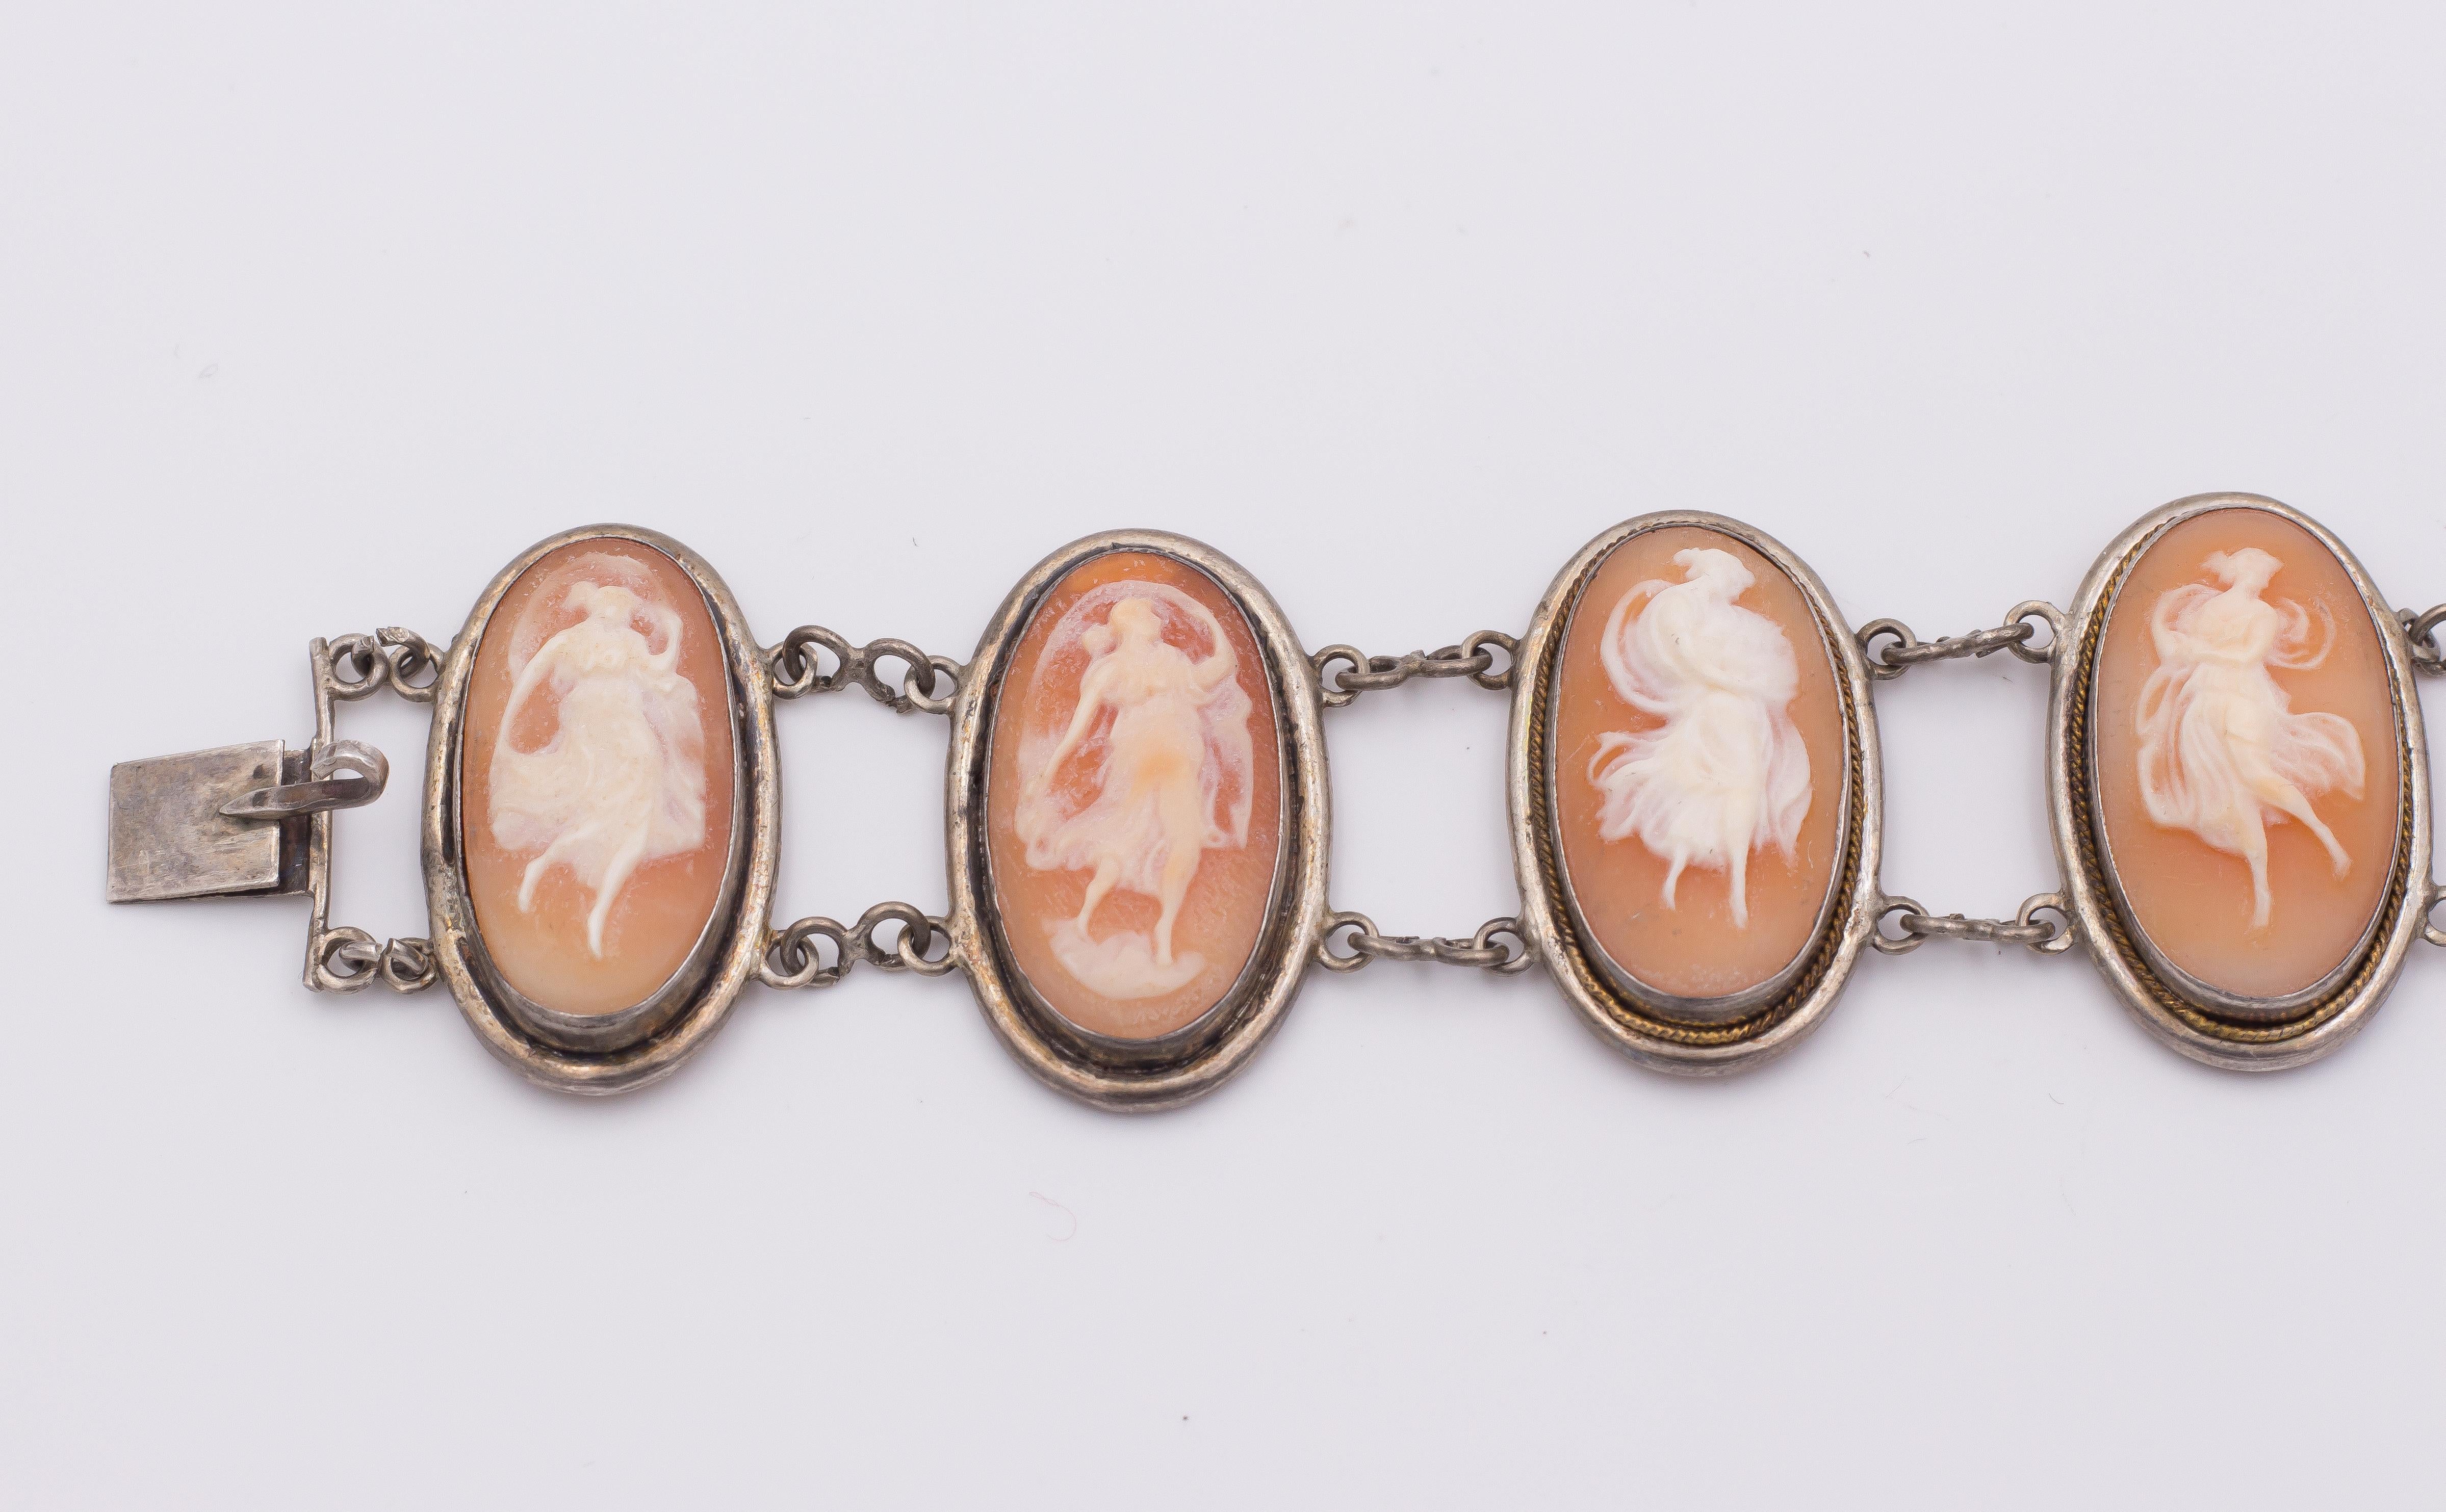 This antique bracelet, dating from the late 19th Century, is set with seven oval cameos: each one depicts a young woman dancing, with their clothes moving and dancing with them. 
Each cameo is connected to the other by two chains. 
The bracelet is